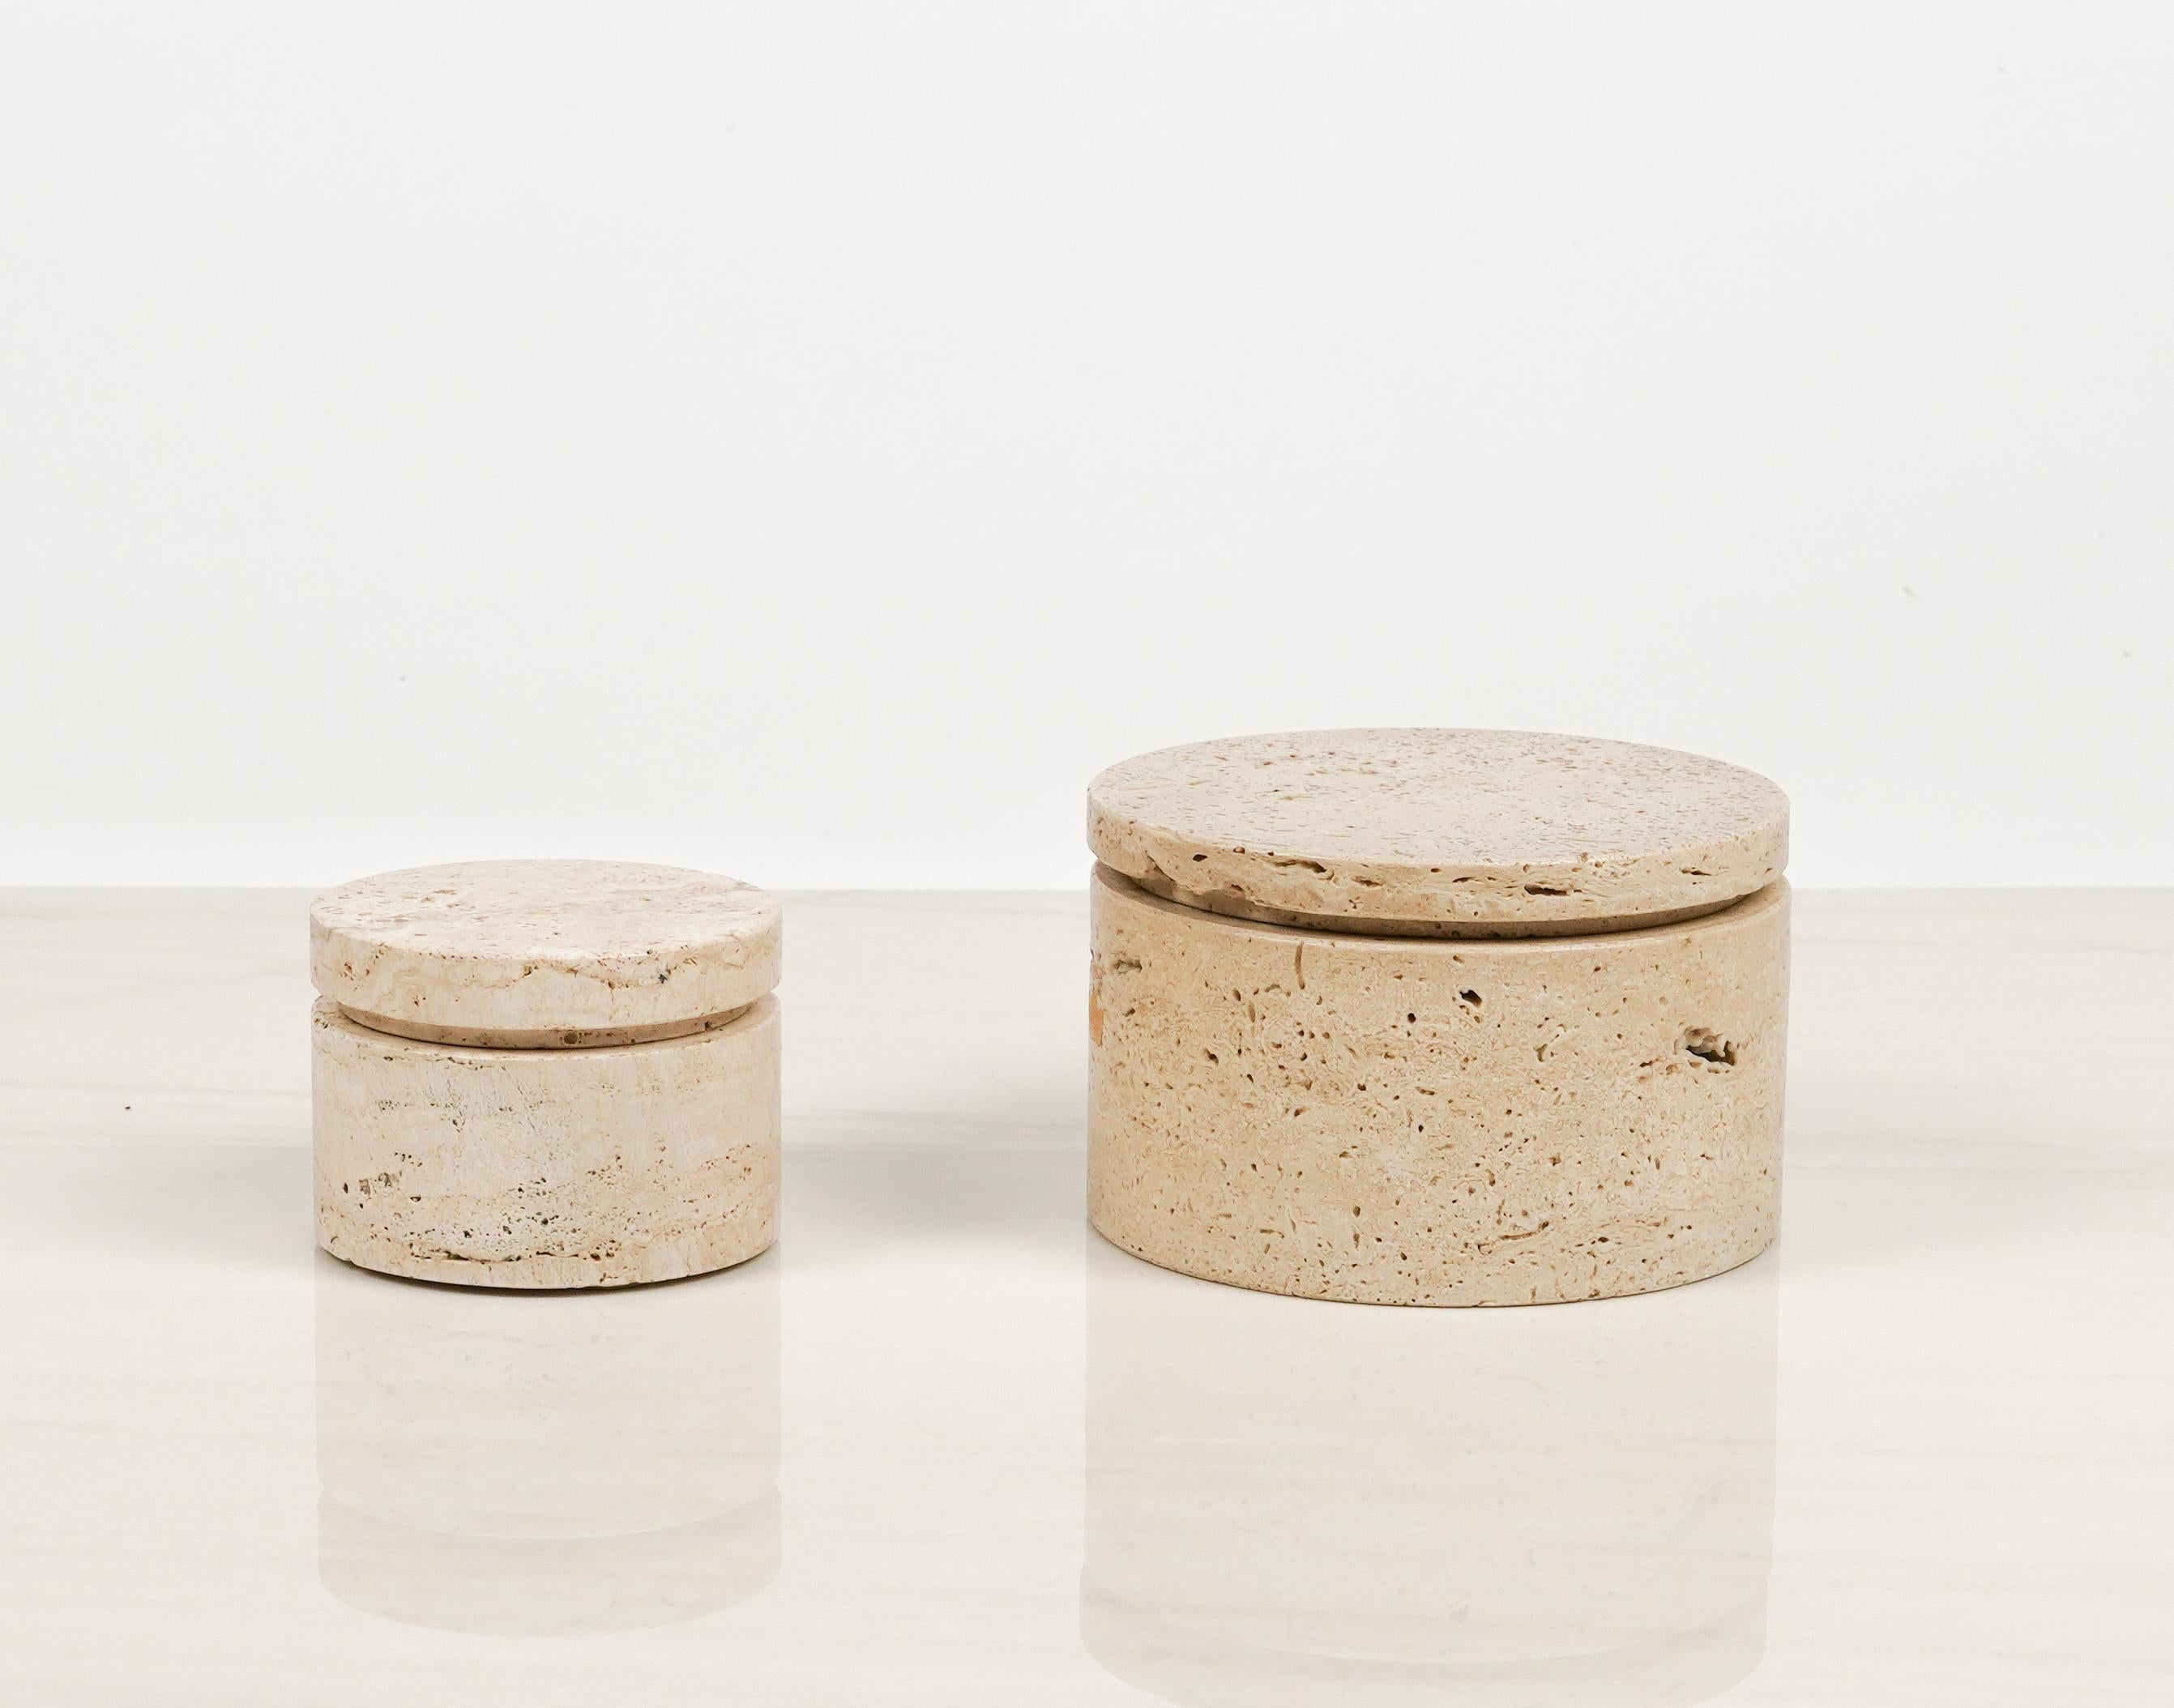 Midcentury Pair of Decorative Box in Travertine Enzo Mari Style, Italy 1970s For Sale 2